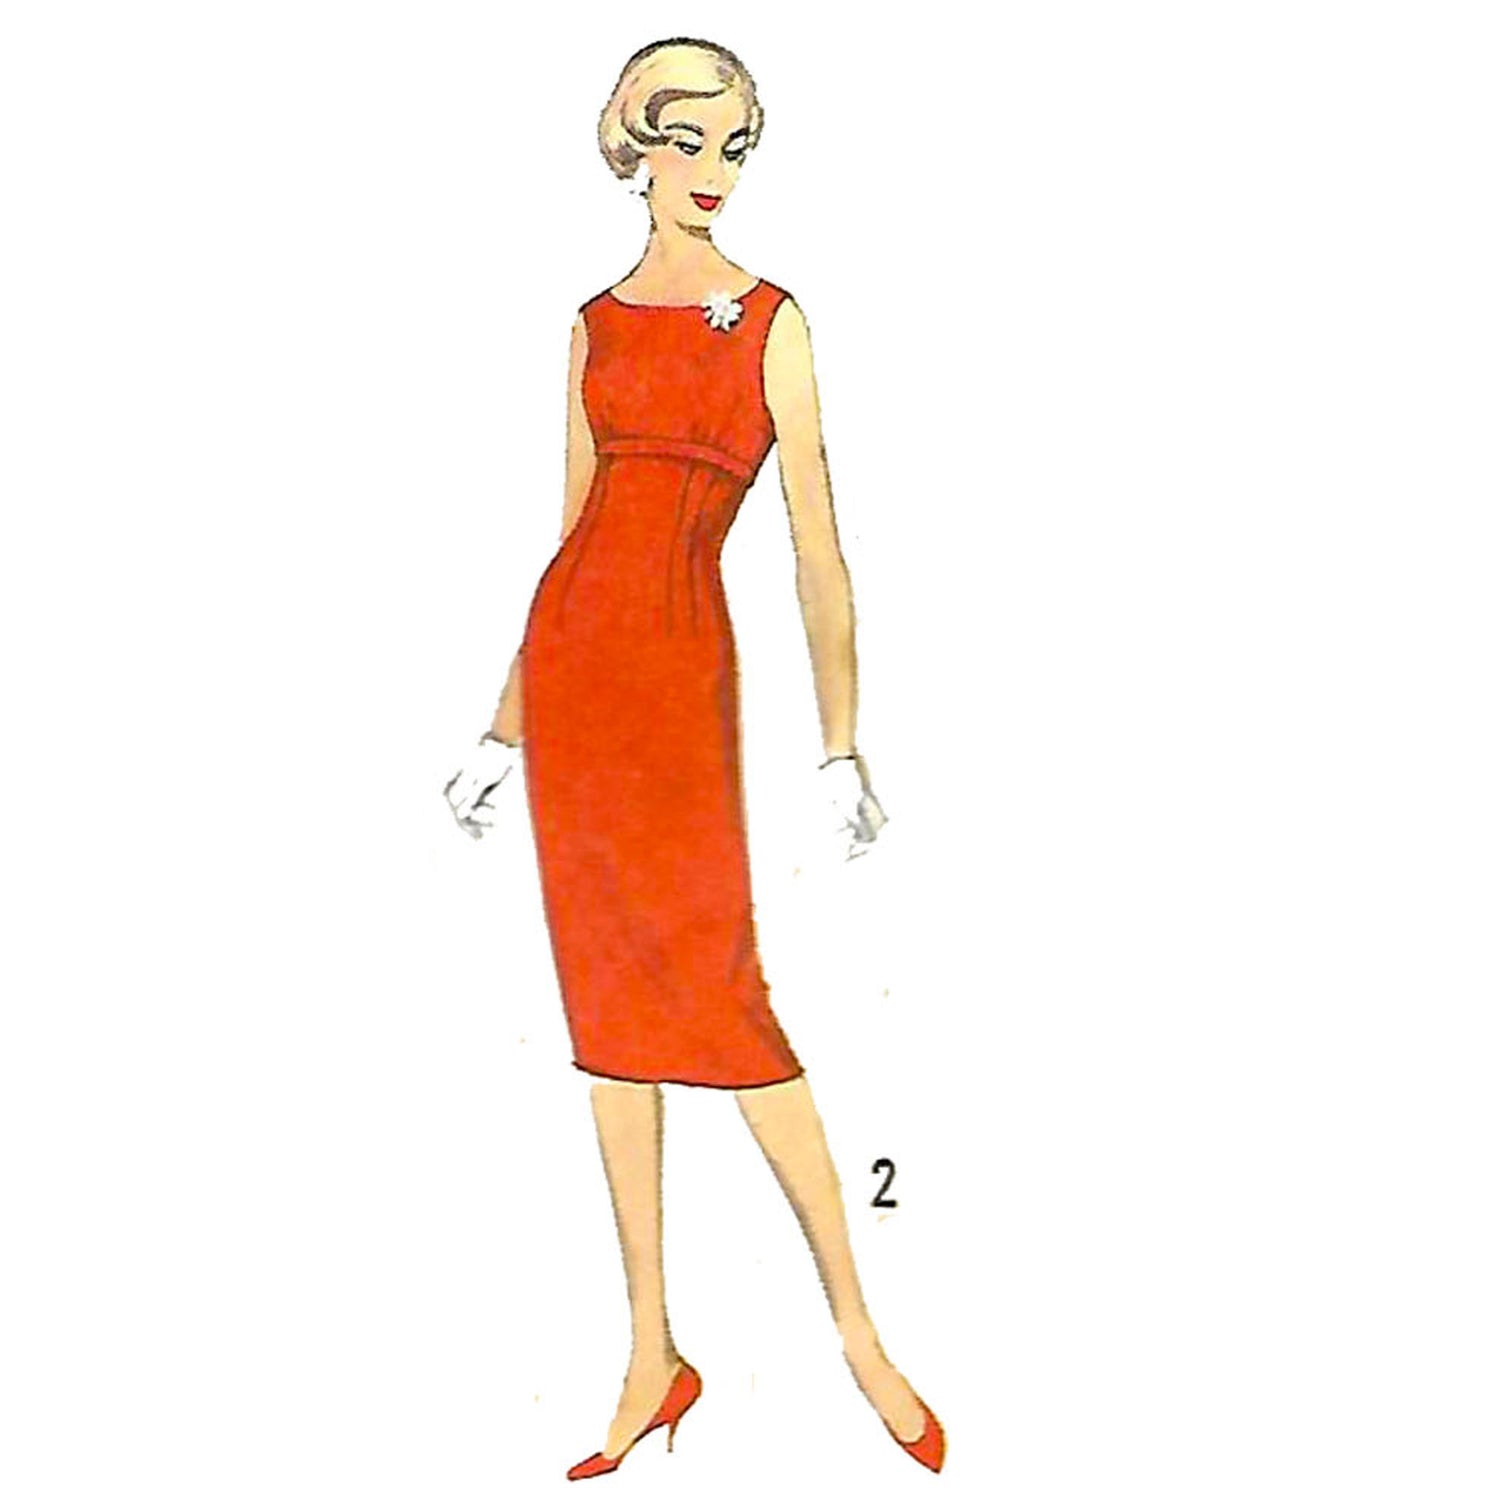 Model wearing 1950s dress, jacket and overskirt made from Simplicity 3035 pattern